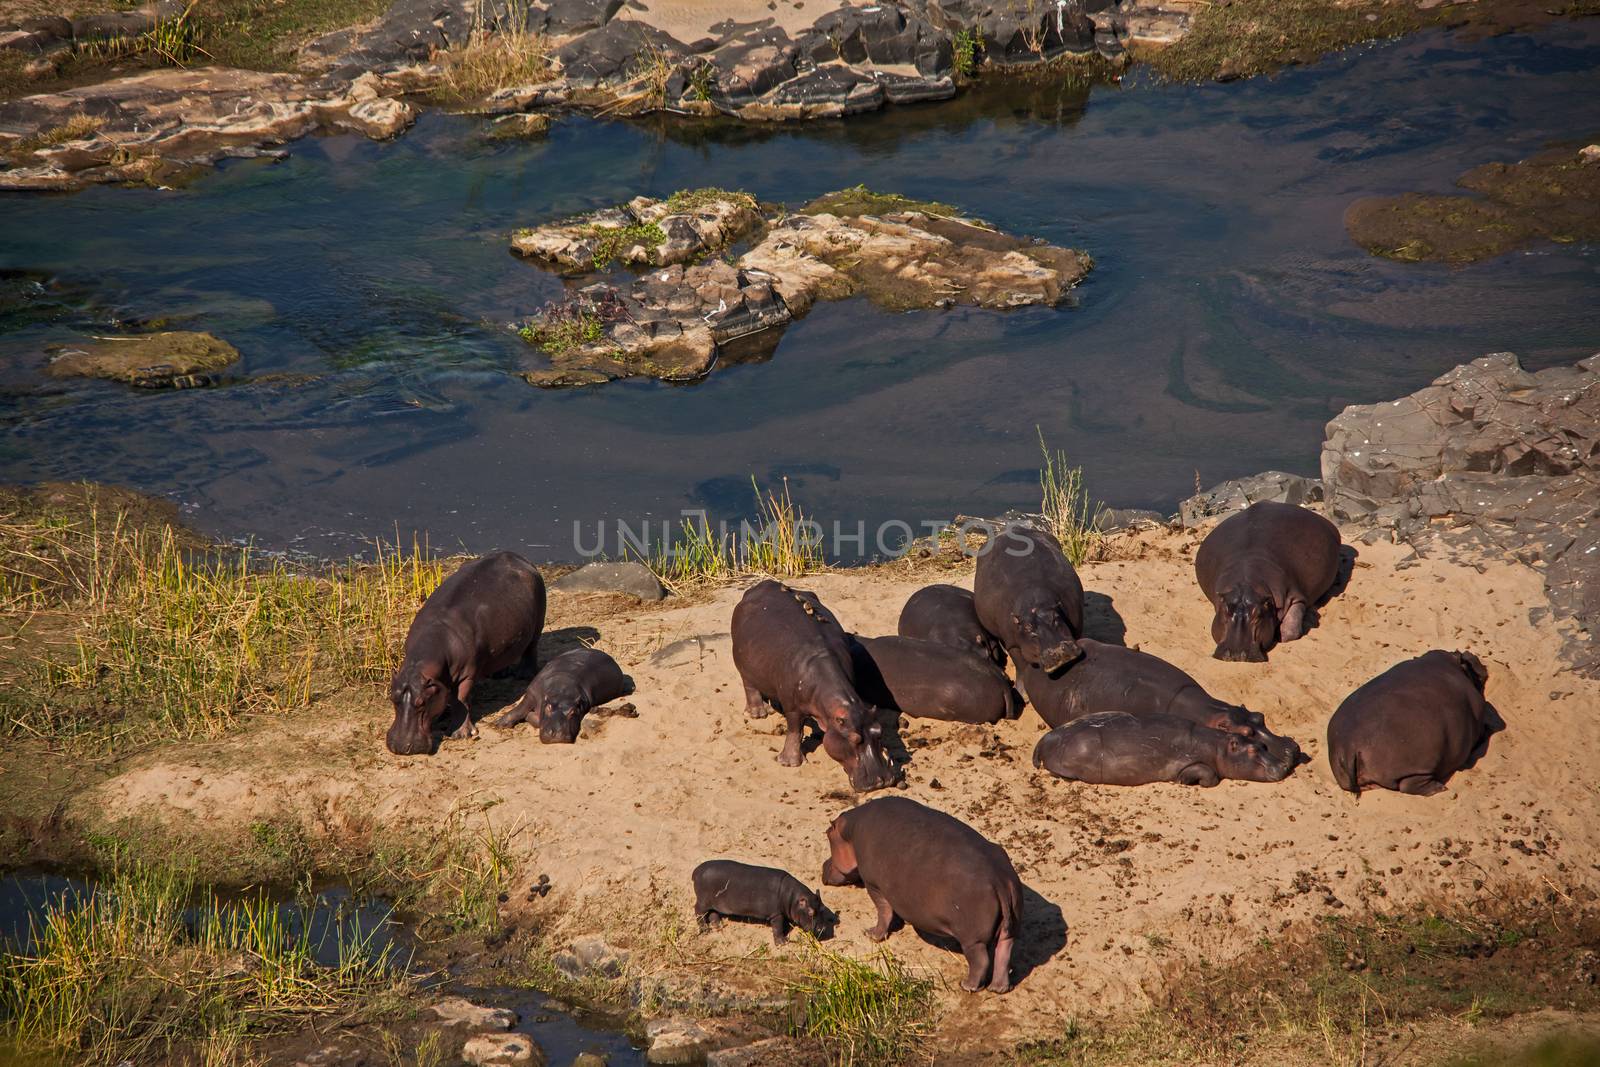 A pod of hippos sunning themselves on a sandbank in the Olifants River, Kruger National Park, South Africa.